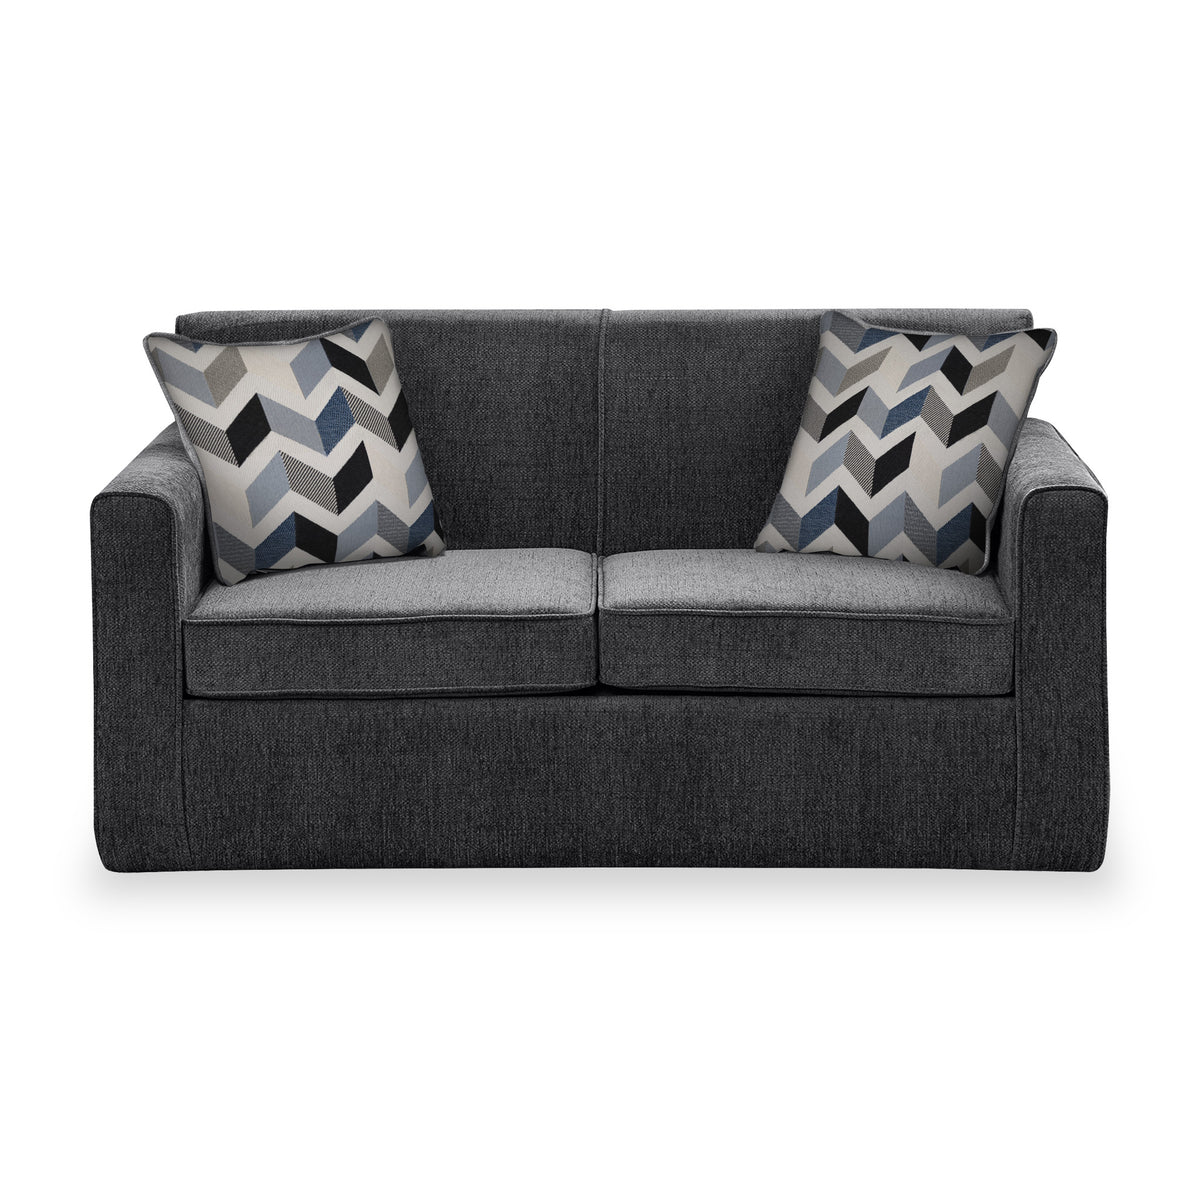 Bawtry Charcoal Faux Linen 2 Seater Sofabed with Denim Scatter Cushions from Roseland Furniture